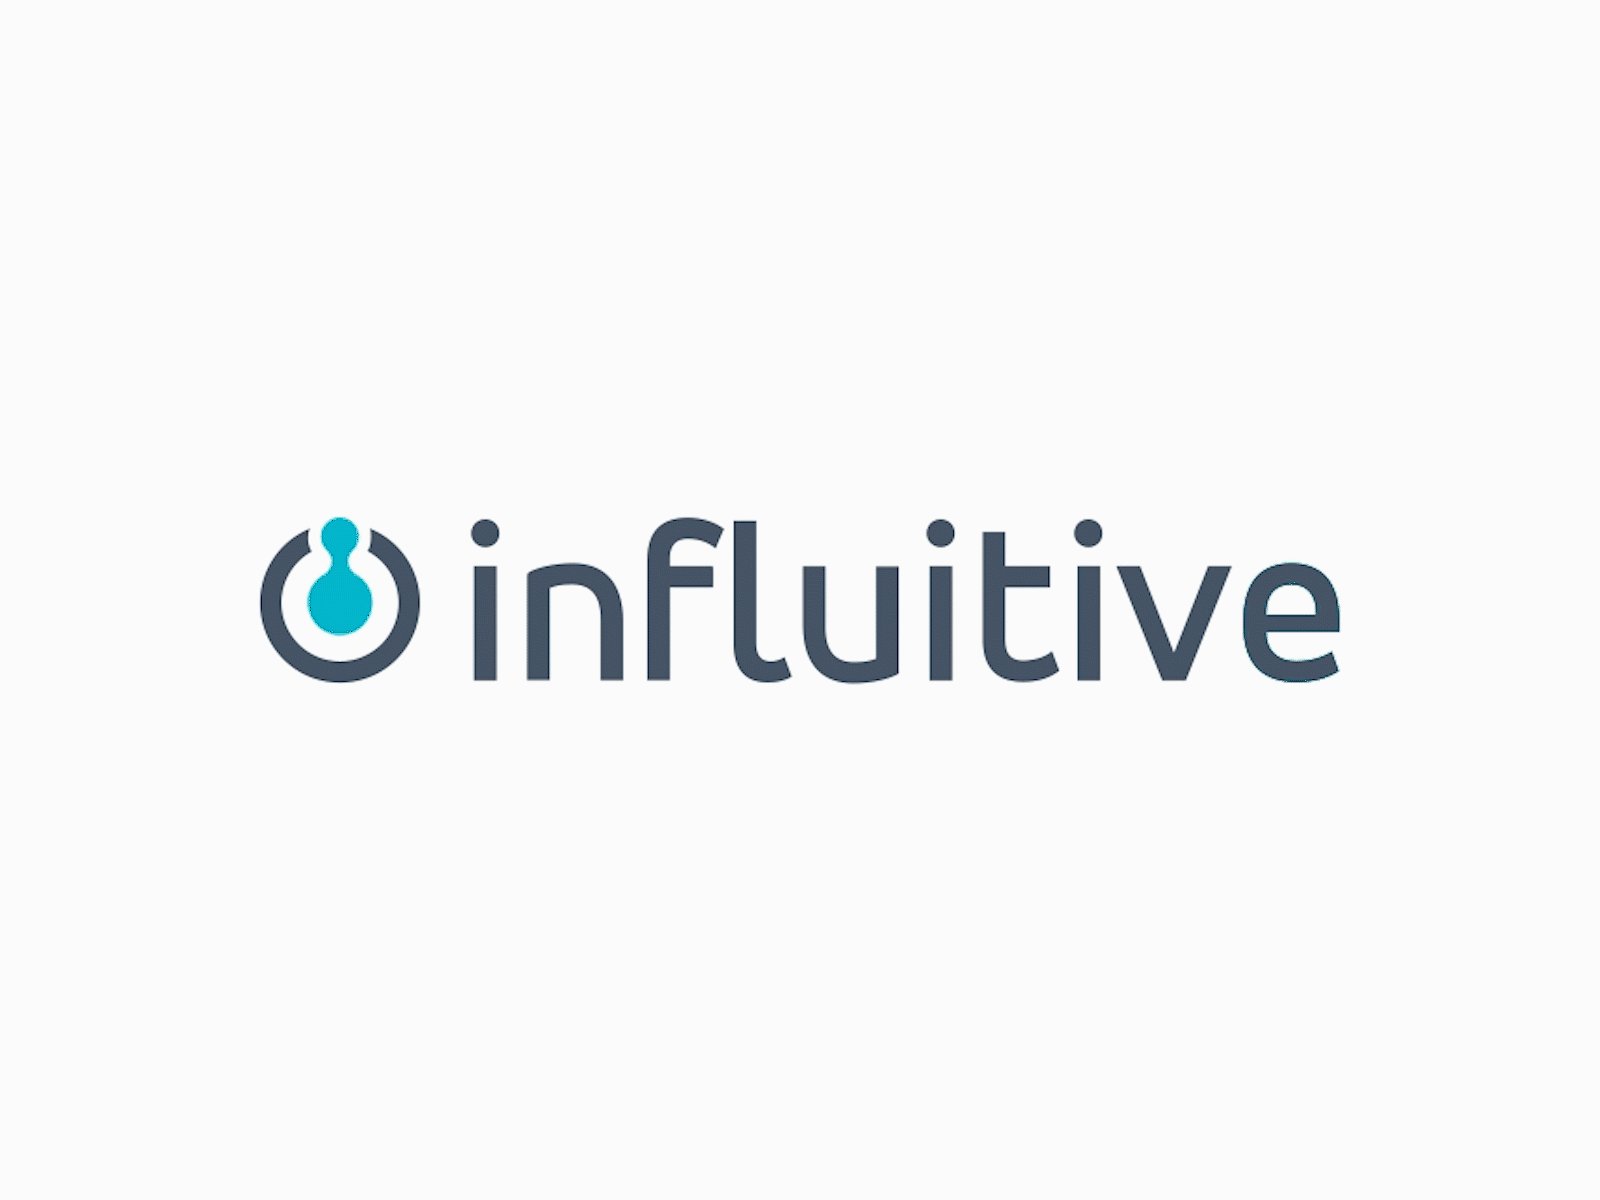 Animated Influitive logo after effects animation blue branding design icon logo motion graphics vector